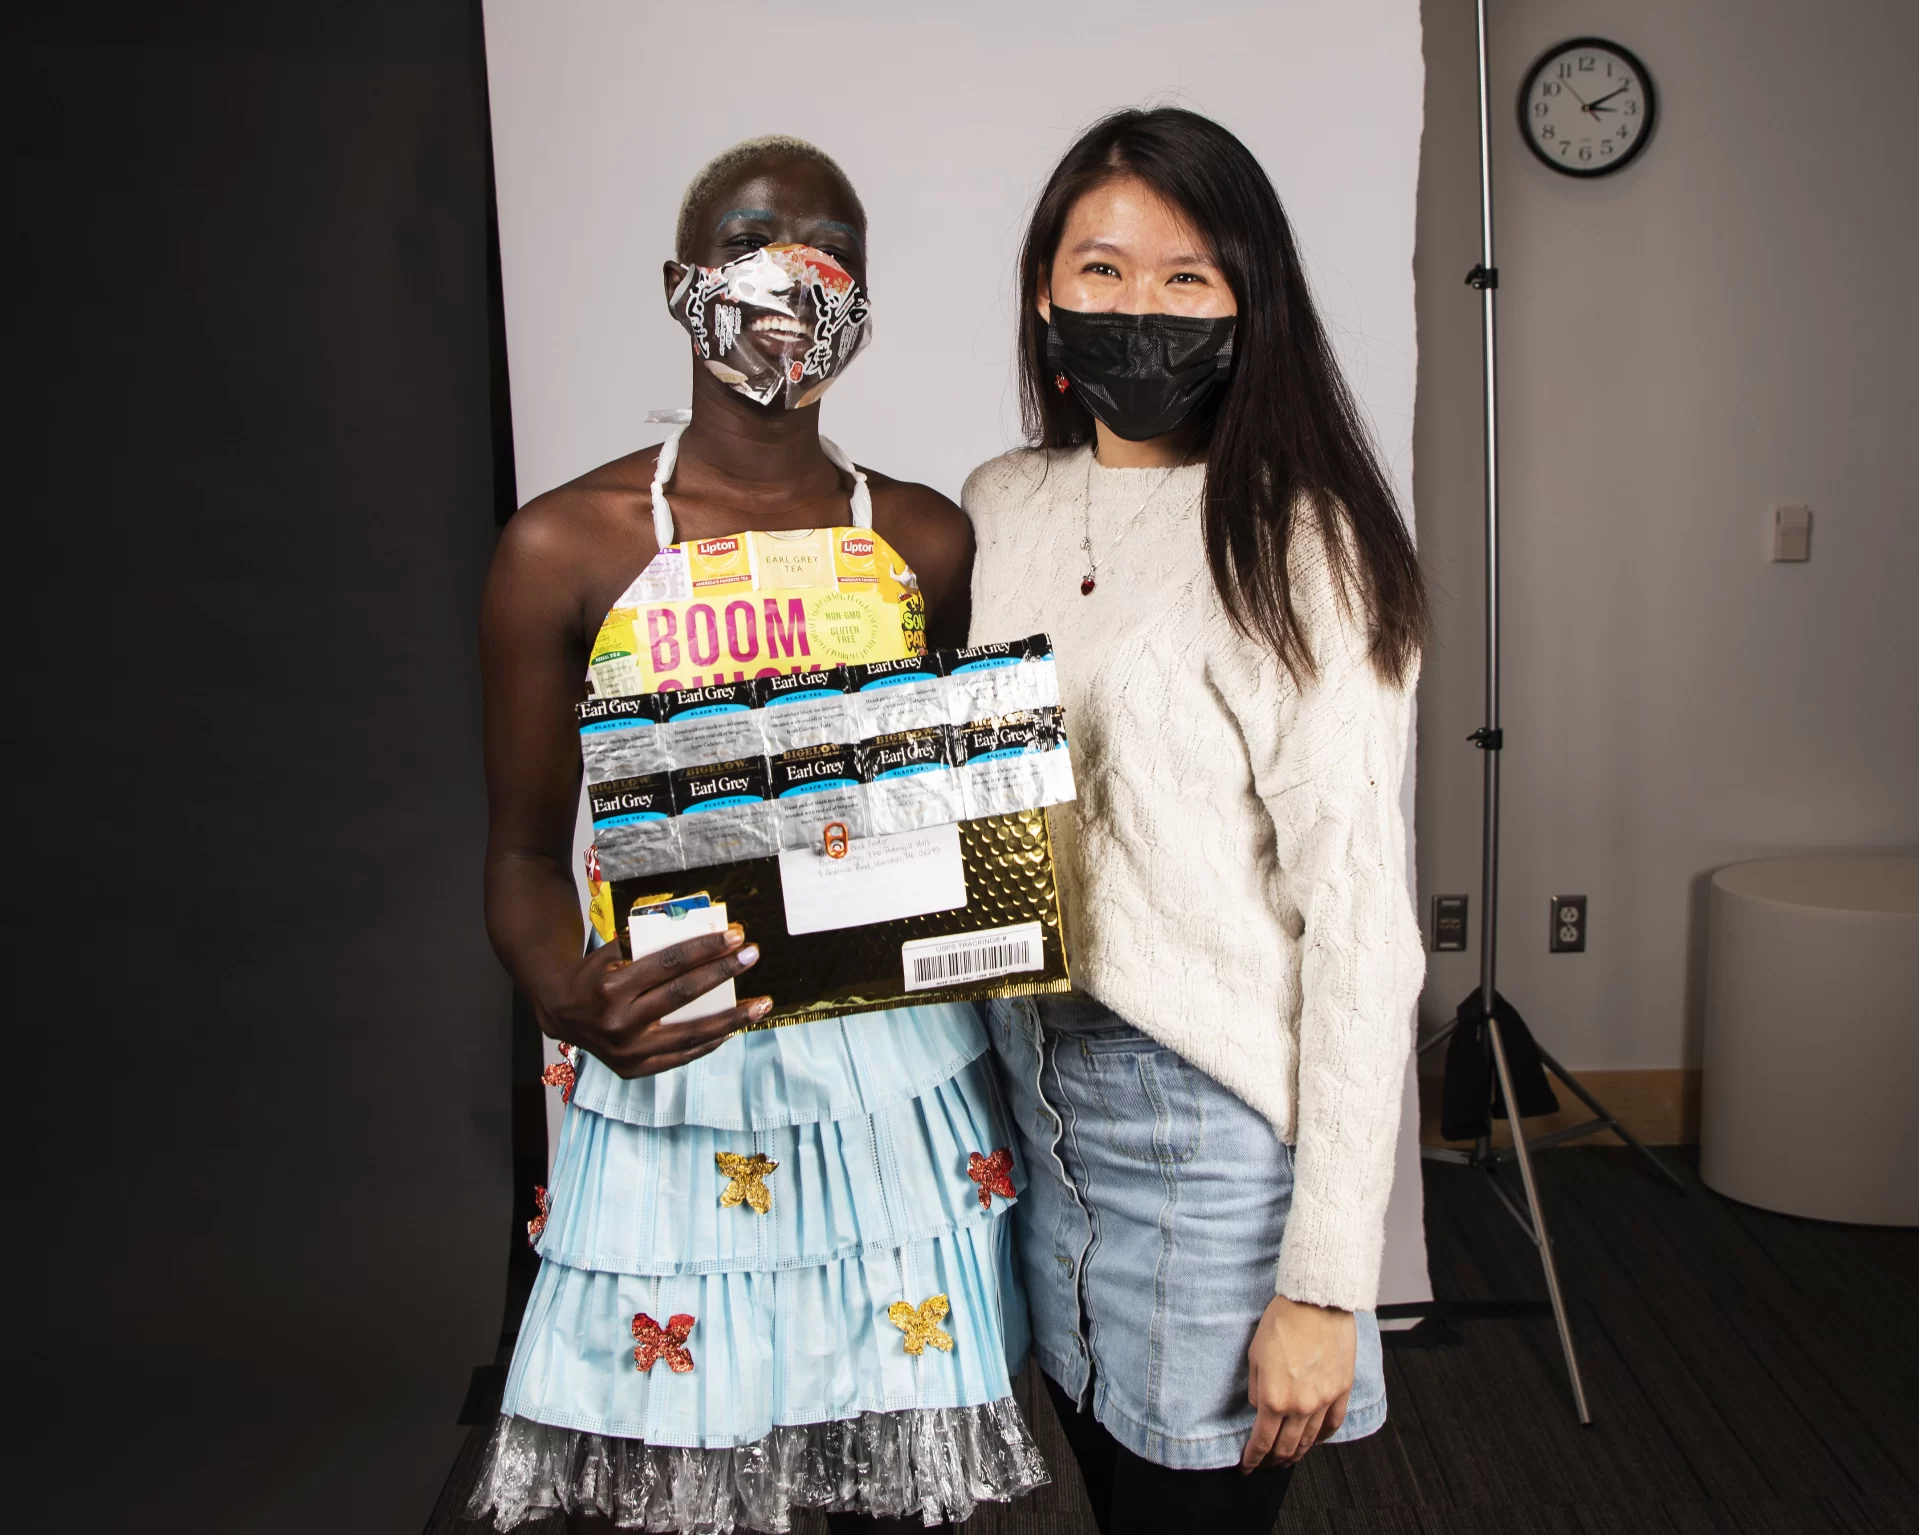 Sandia Taban ‘22 of China, and Yueh Chuah ‘22 of Malaysia, pose for portraits dressed in attire created for this years Trashion Show on November 12, 2021.